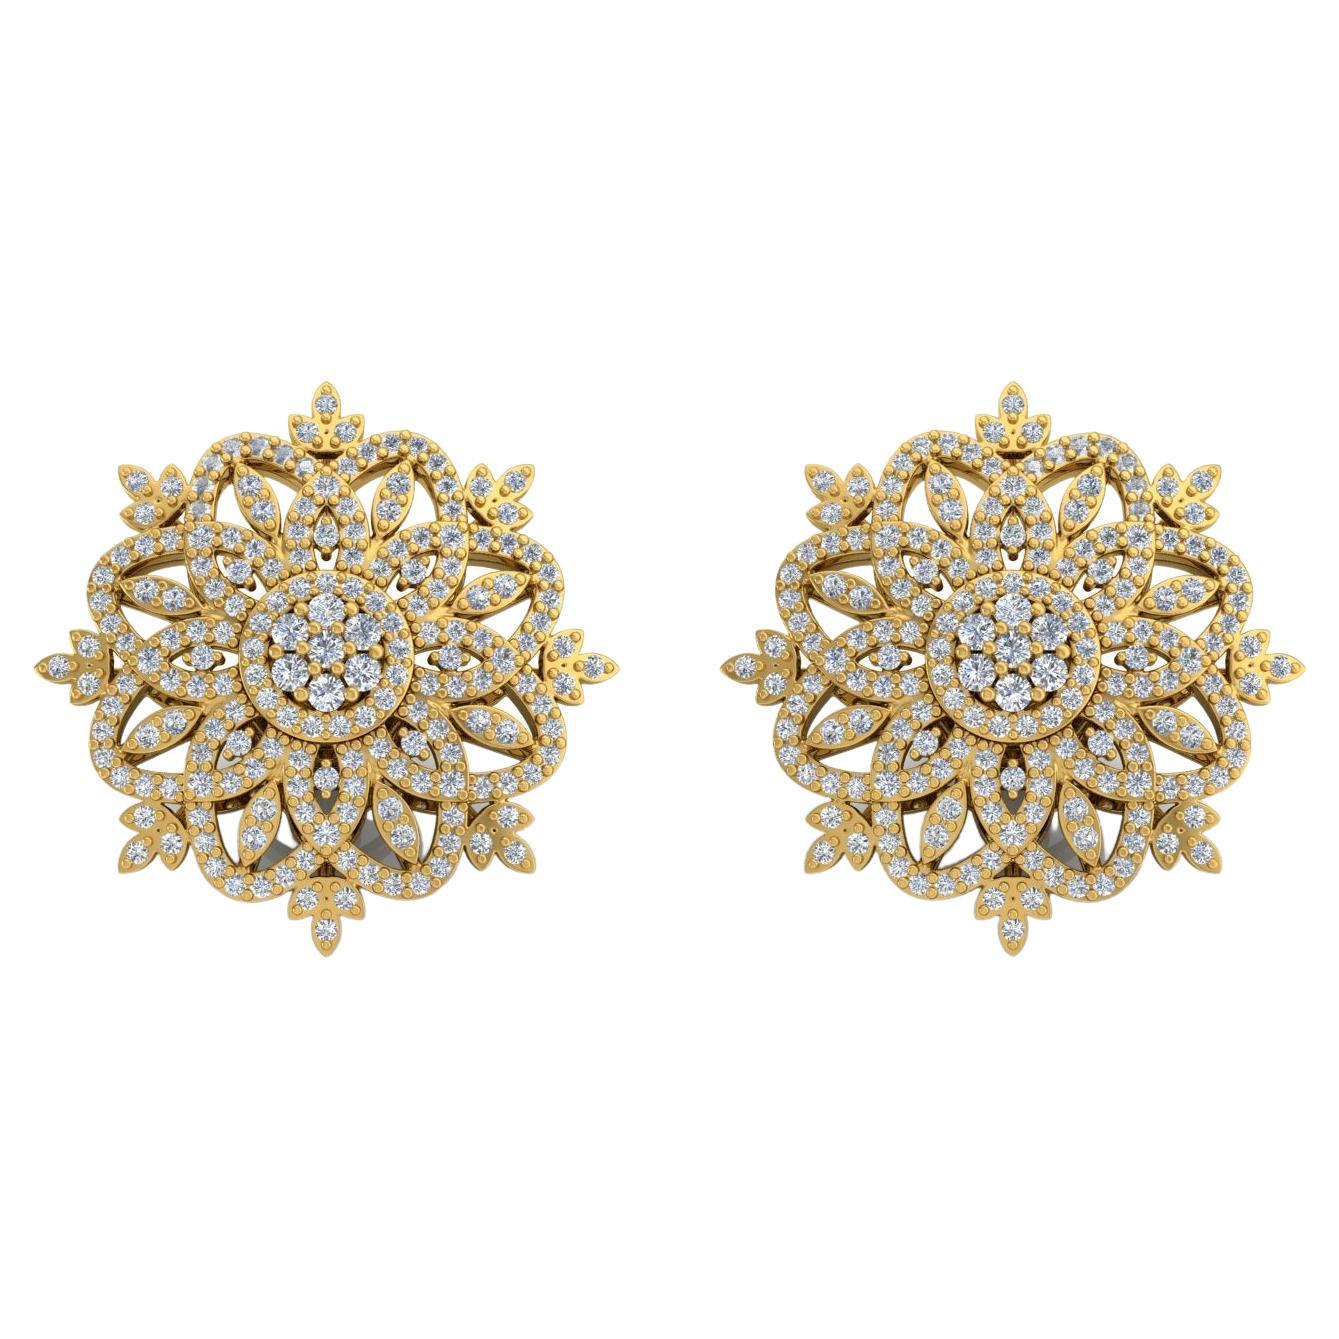 Real SI Clarity HI Color Pave Diamond Flower Stud Earrings 18 Karat Yellow Gold For Sale